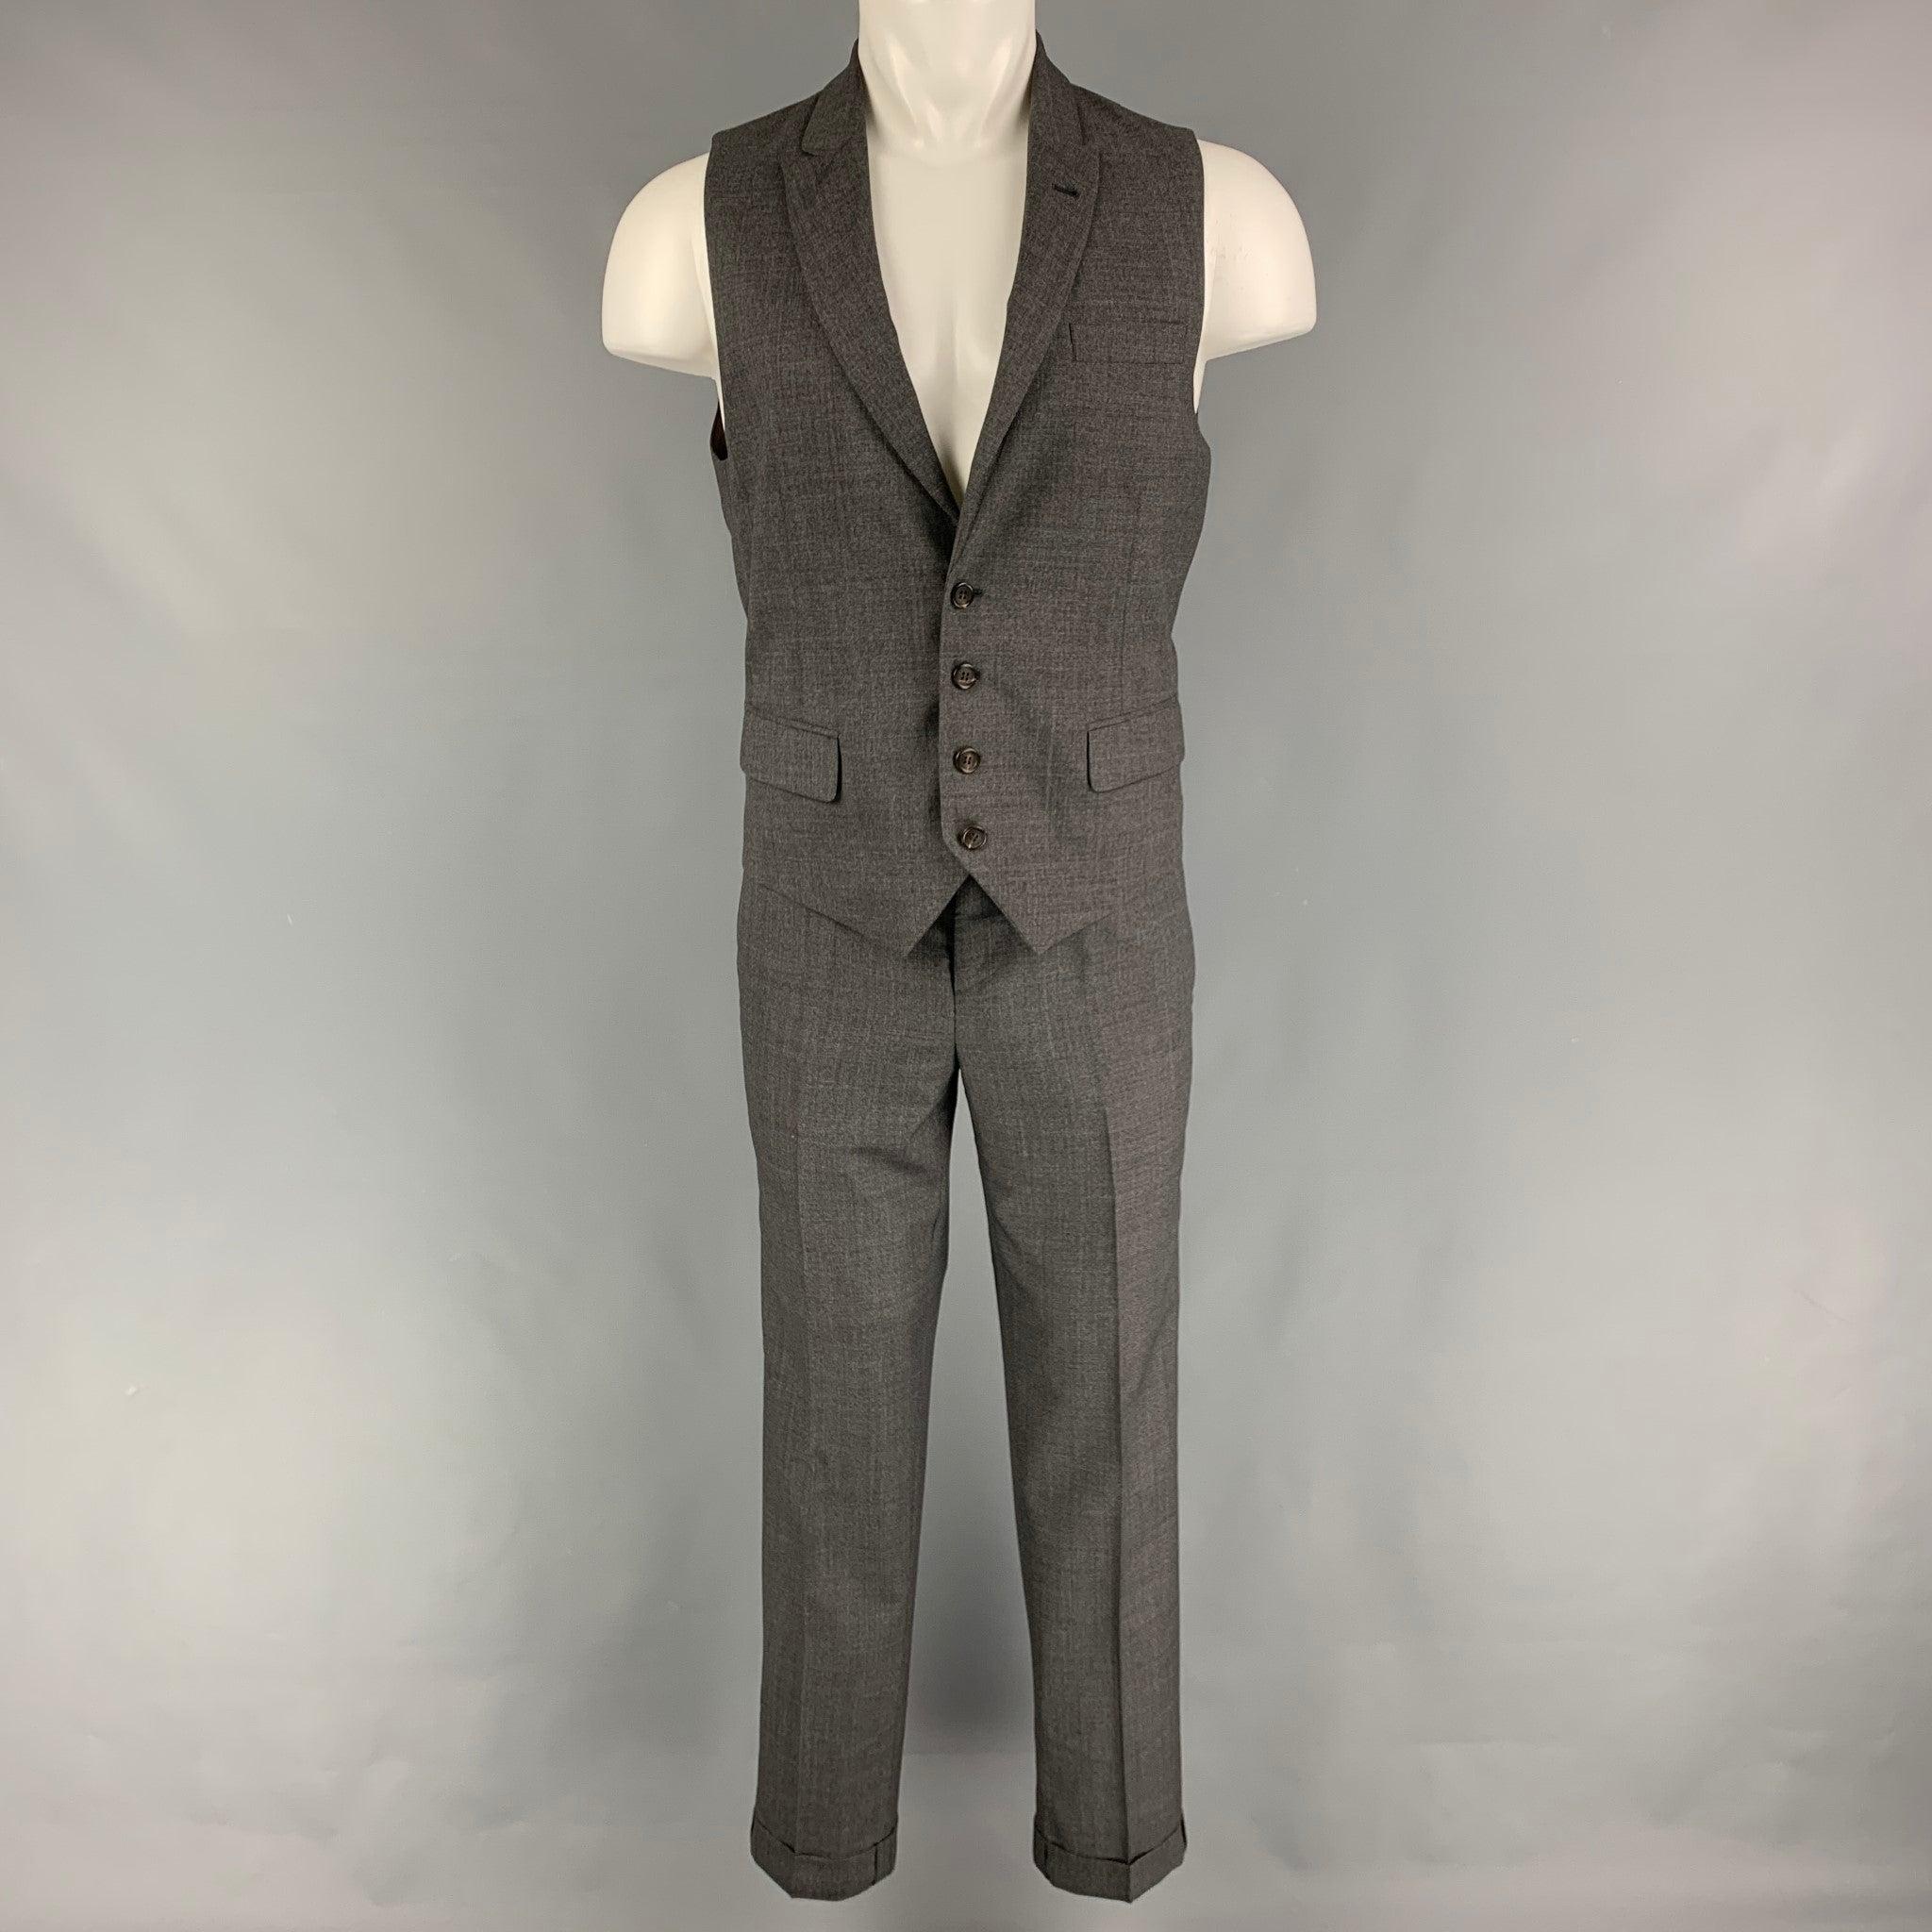 BRUNELLO CUCINELLI vest
suit comes in a grey wool and includes a single breasted, four button dress vest with a peak lapel and matching flat front trousers. Made in Italy. Very Good Pre-Owned Condition. 

Marked:   Pants / 46 

Measurements: 
 